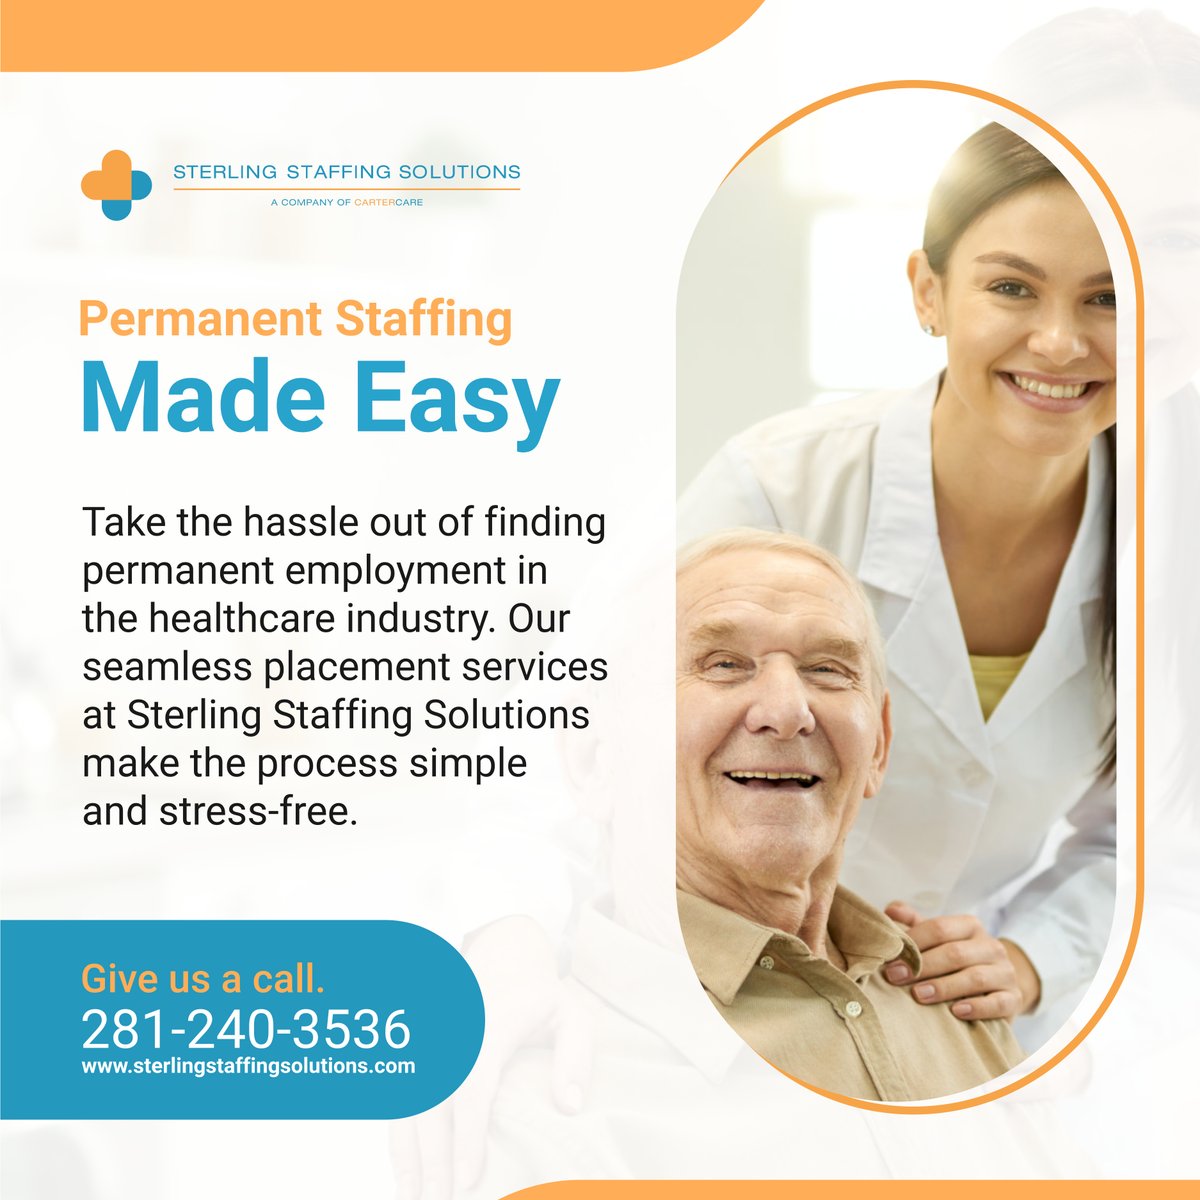 We simplify the placement process with our seamless permanent placement services. Call us to get started! 

#PermanentStaffing #SugarLandTX #HealthCareStaffing